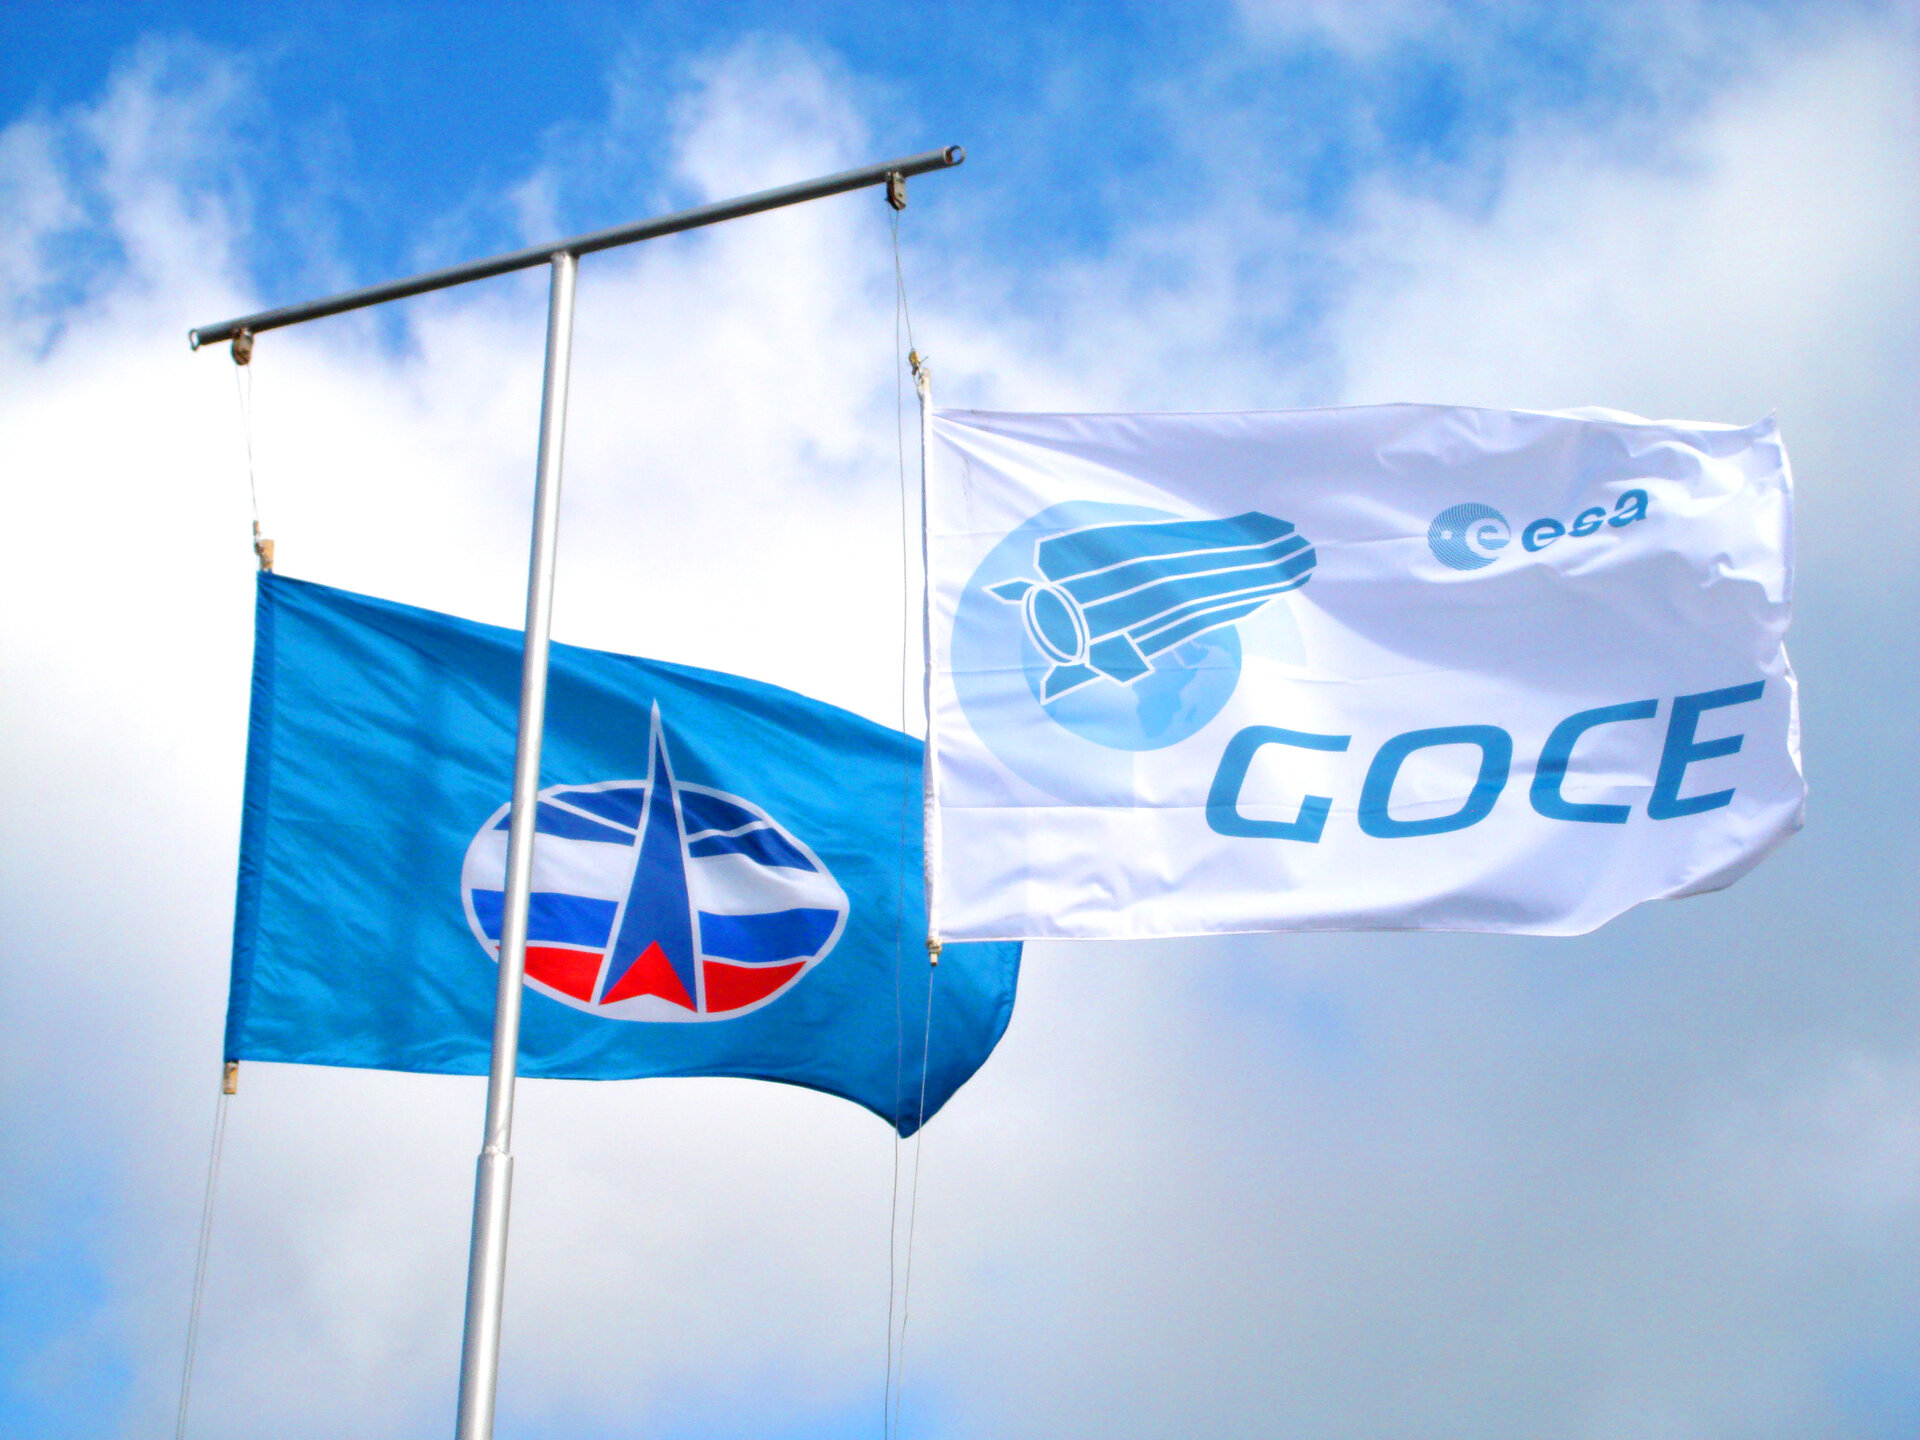 GOCE and Plesetsk Cosmodrome flags